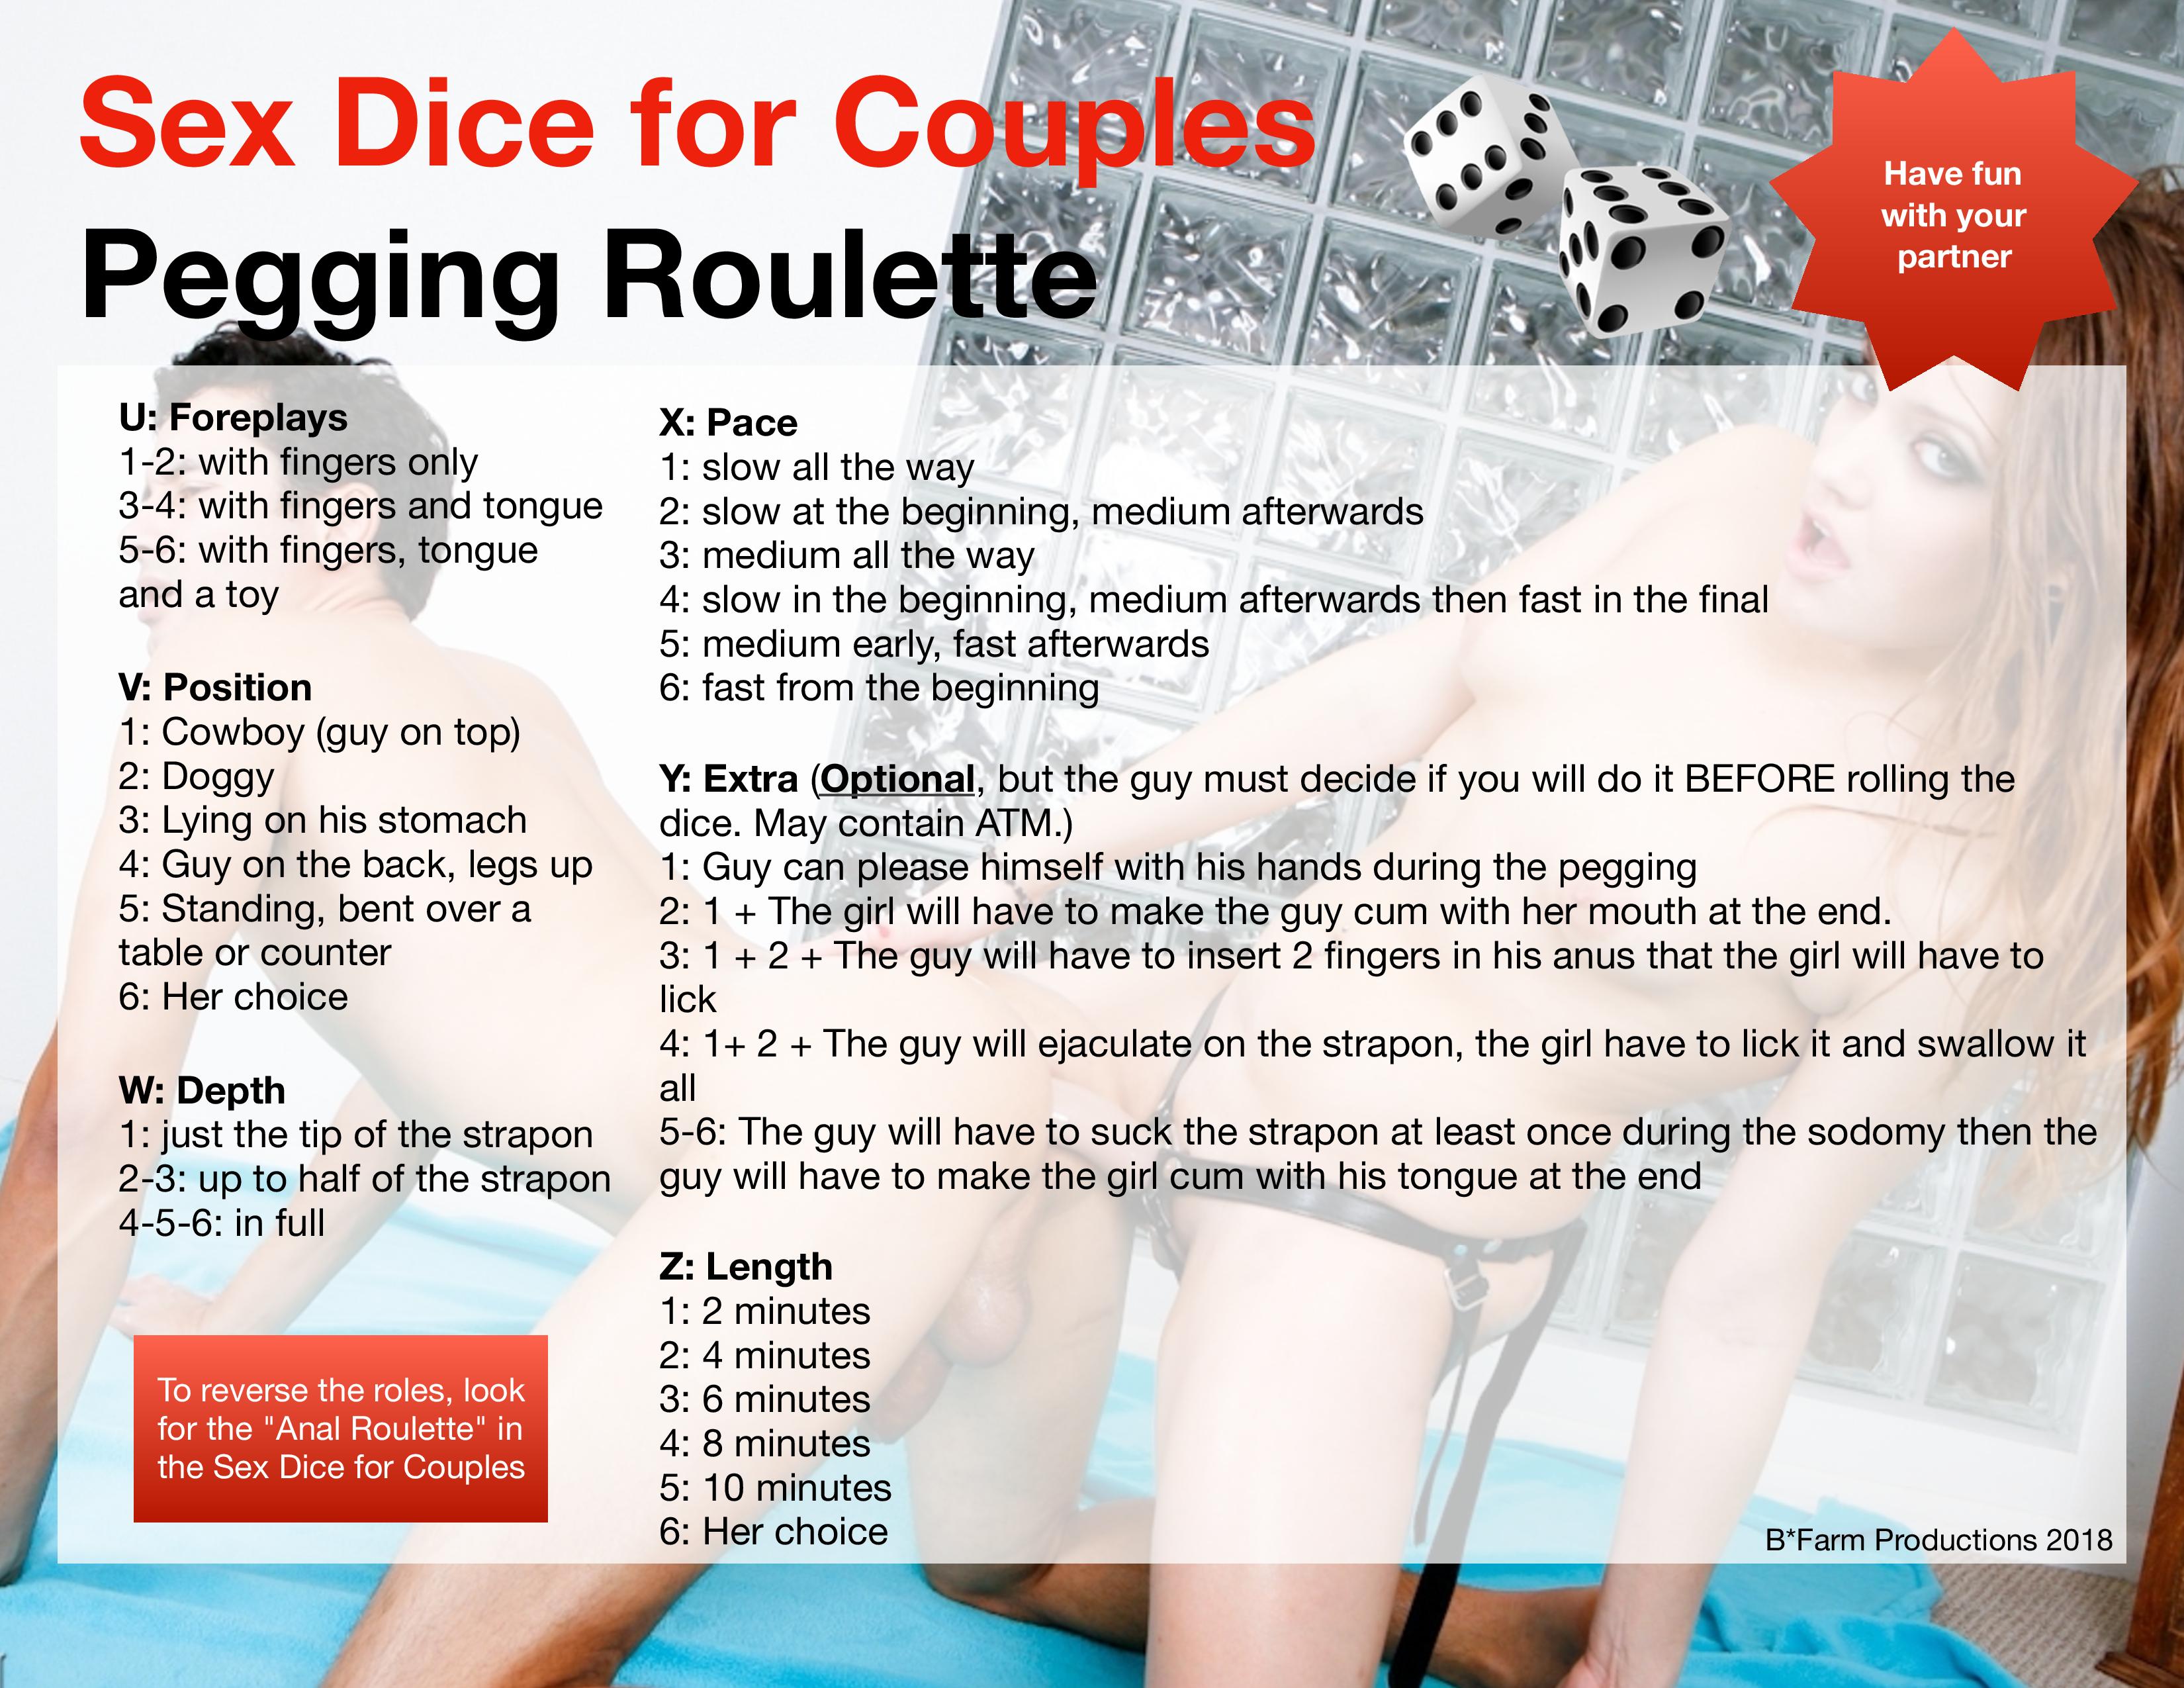 Sex Dice for Couples Pegging Roulette image